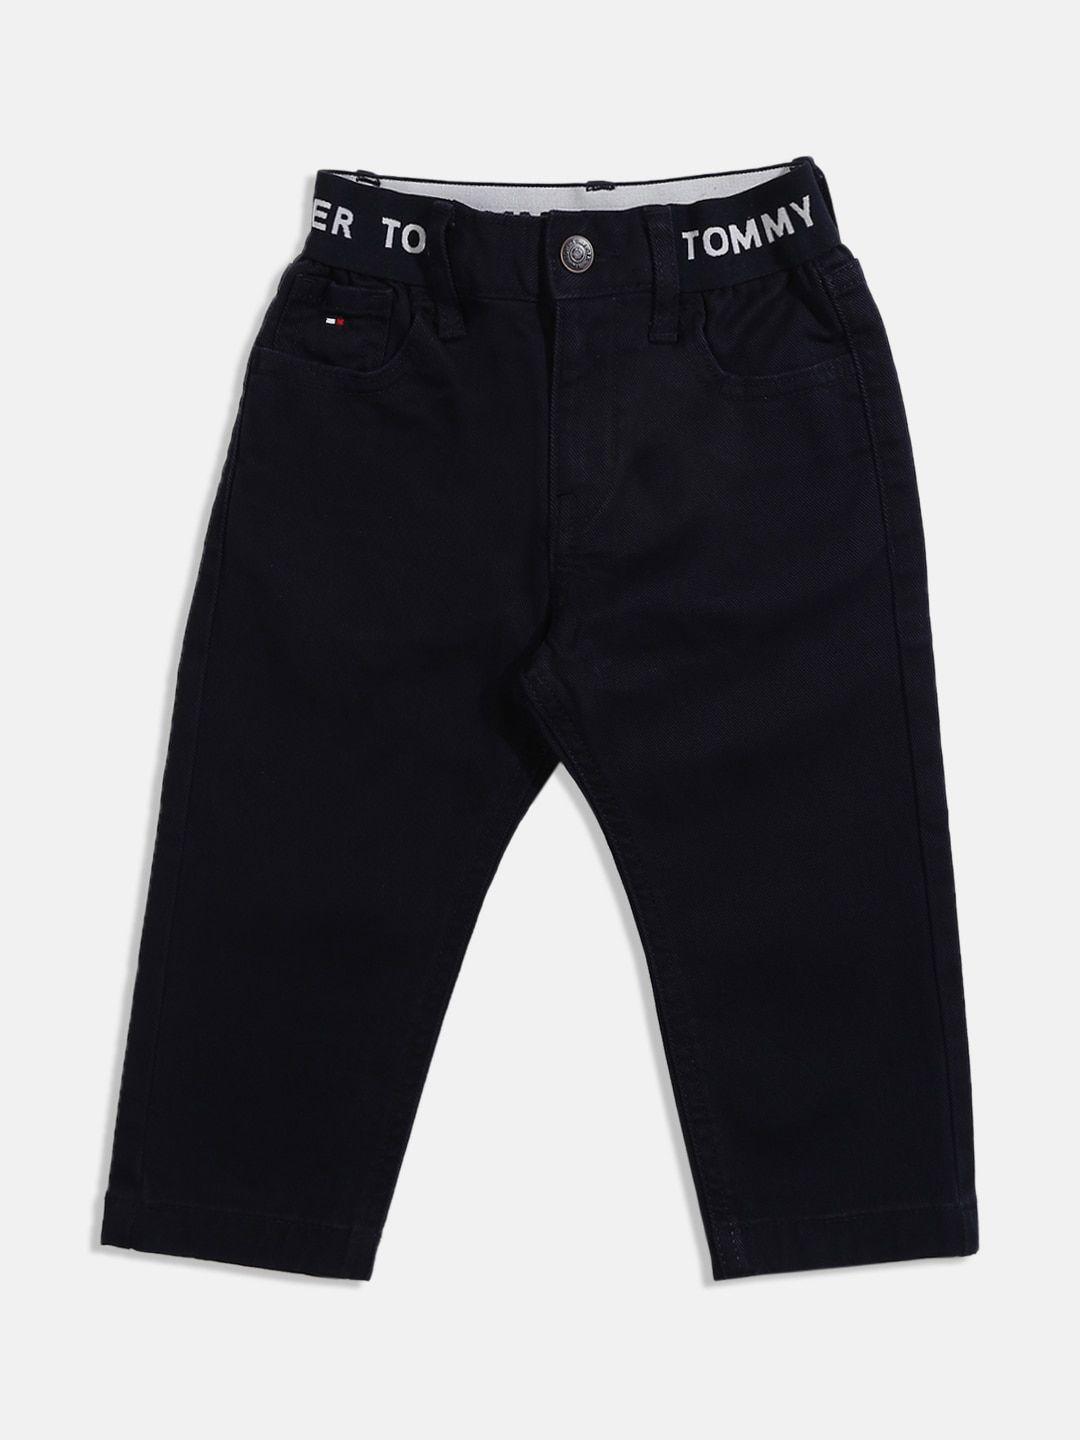 tommy hilfiger boys cotton trousers